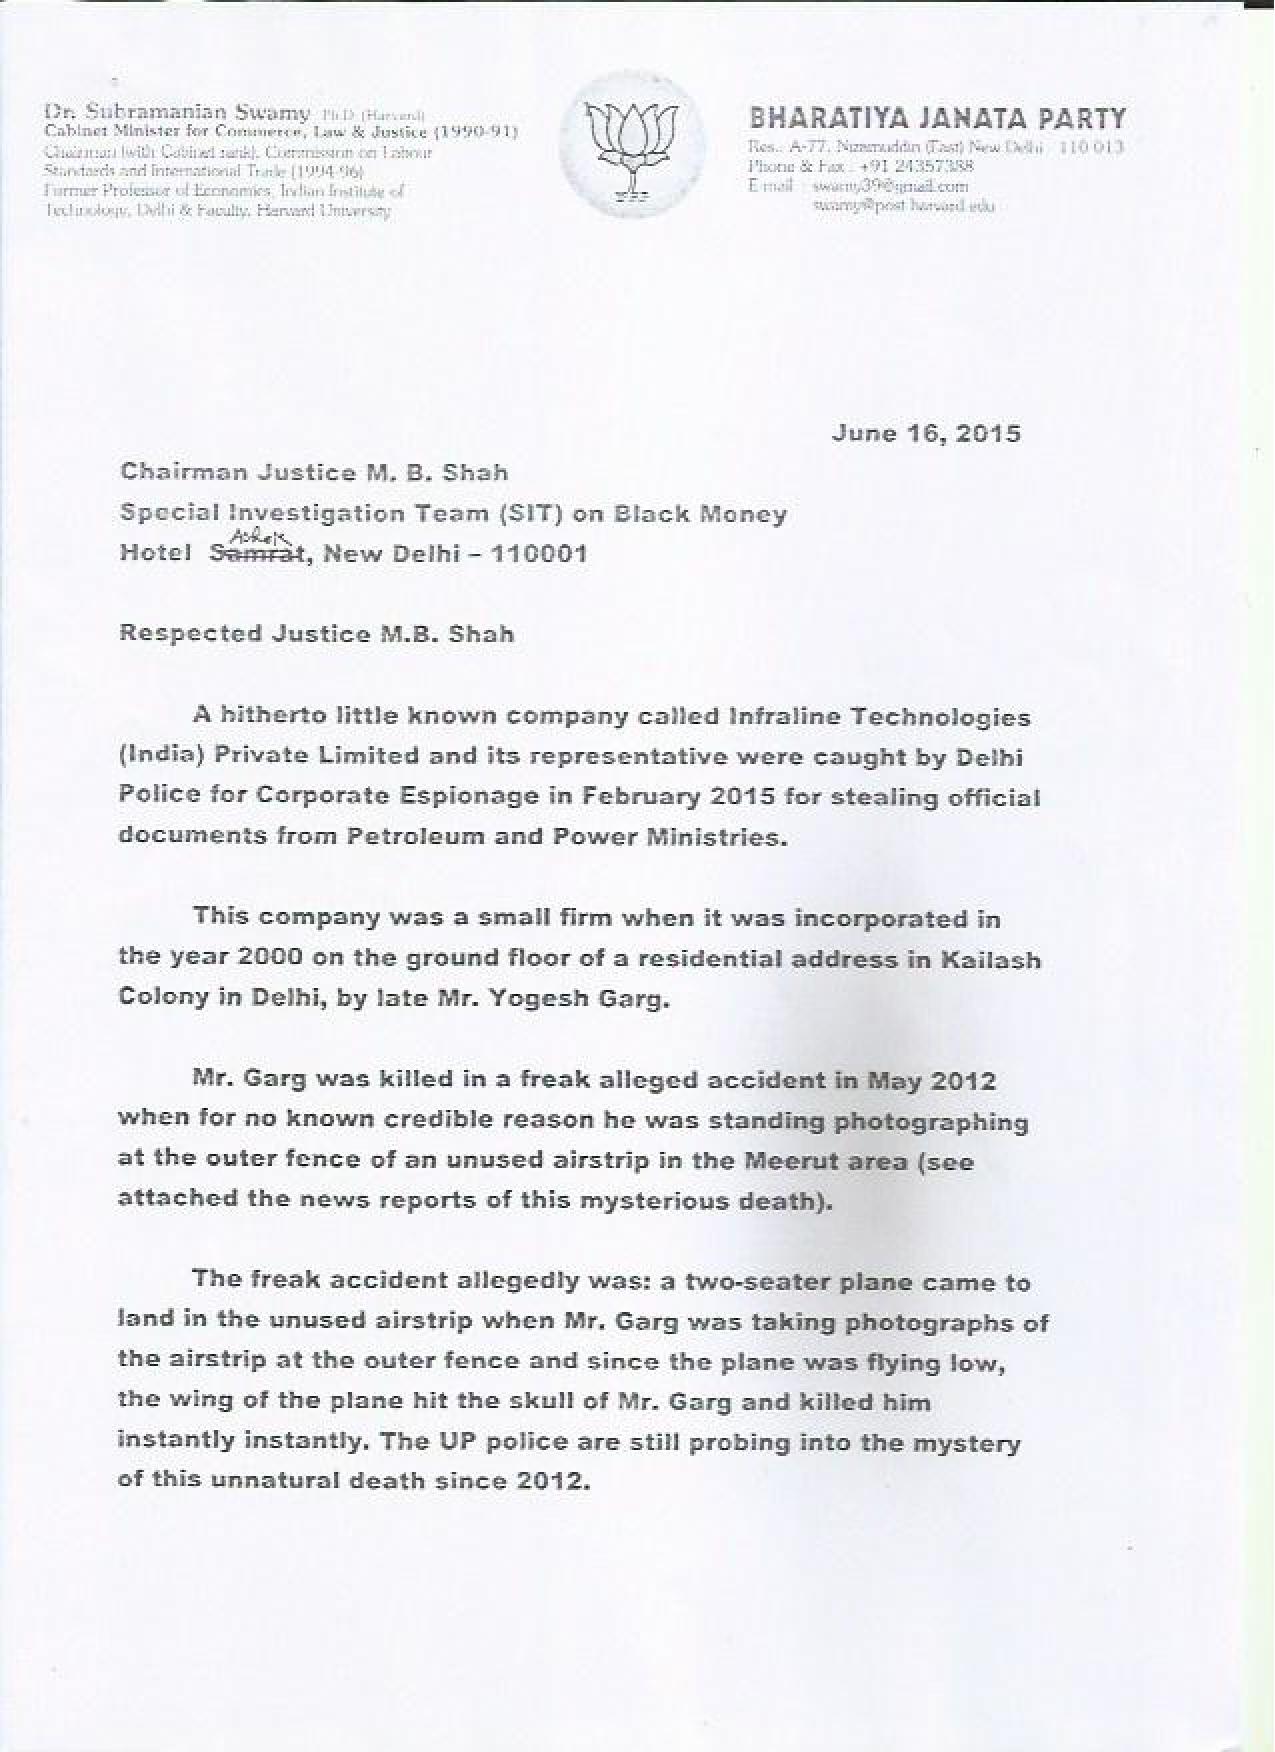 Subramanian Swamy s complaint to SIT Black Money against Infraline Technology June 16,2015-page-001